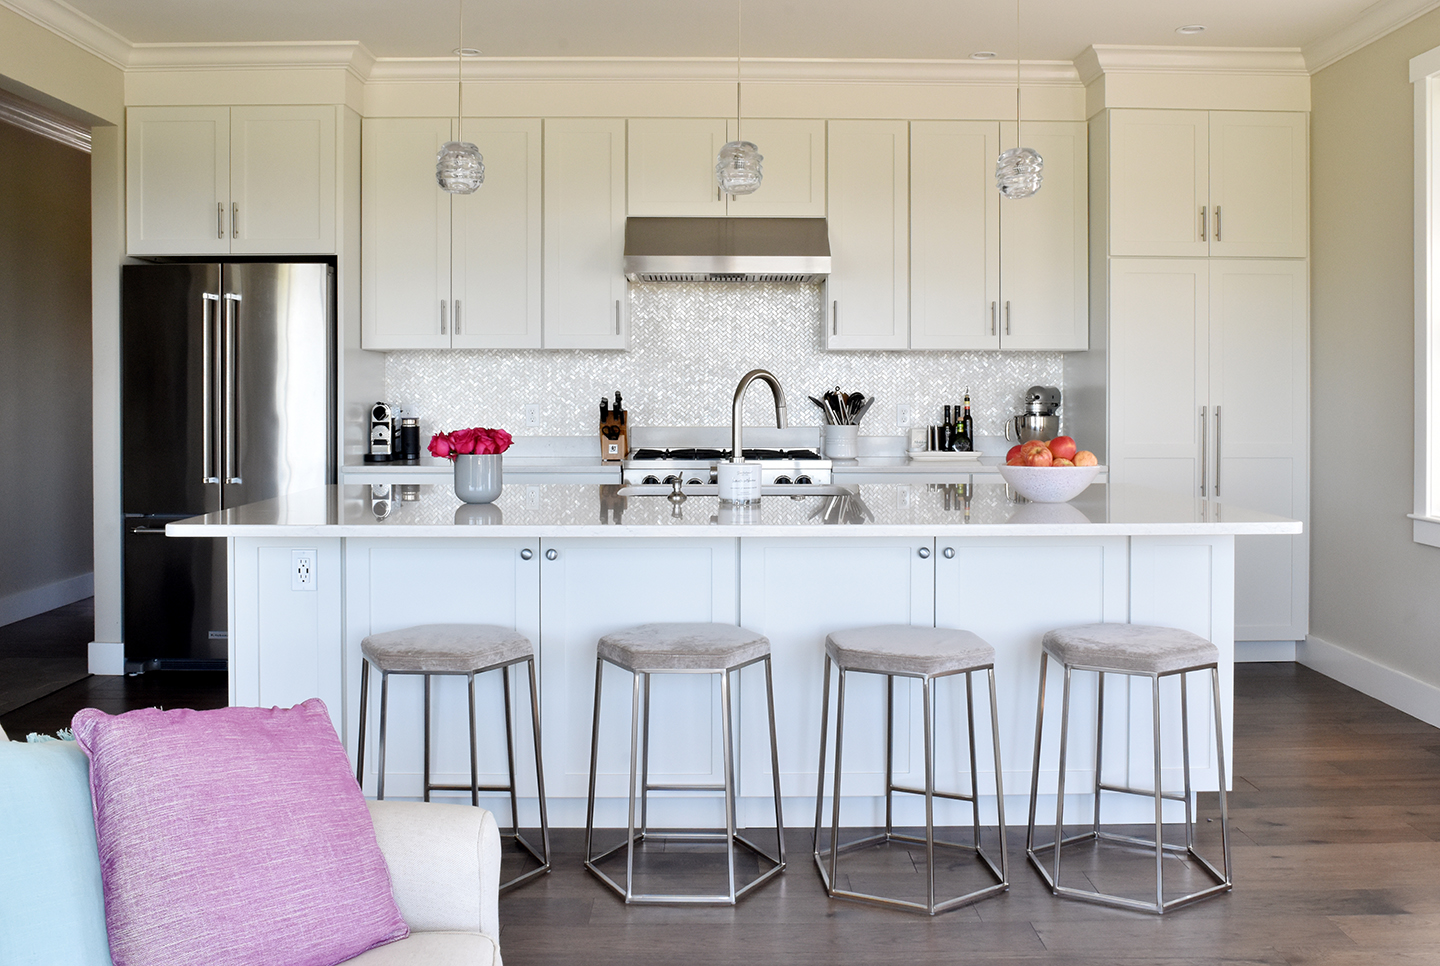 Modern Glam Meets Classic Style In My Latest Home Tour For Houzz /// By Design Fixation #glam #decor #home